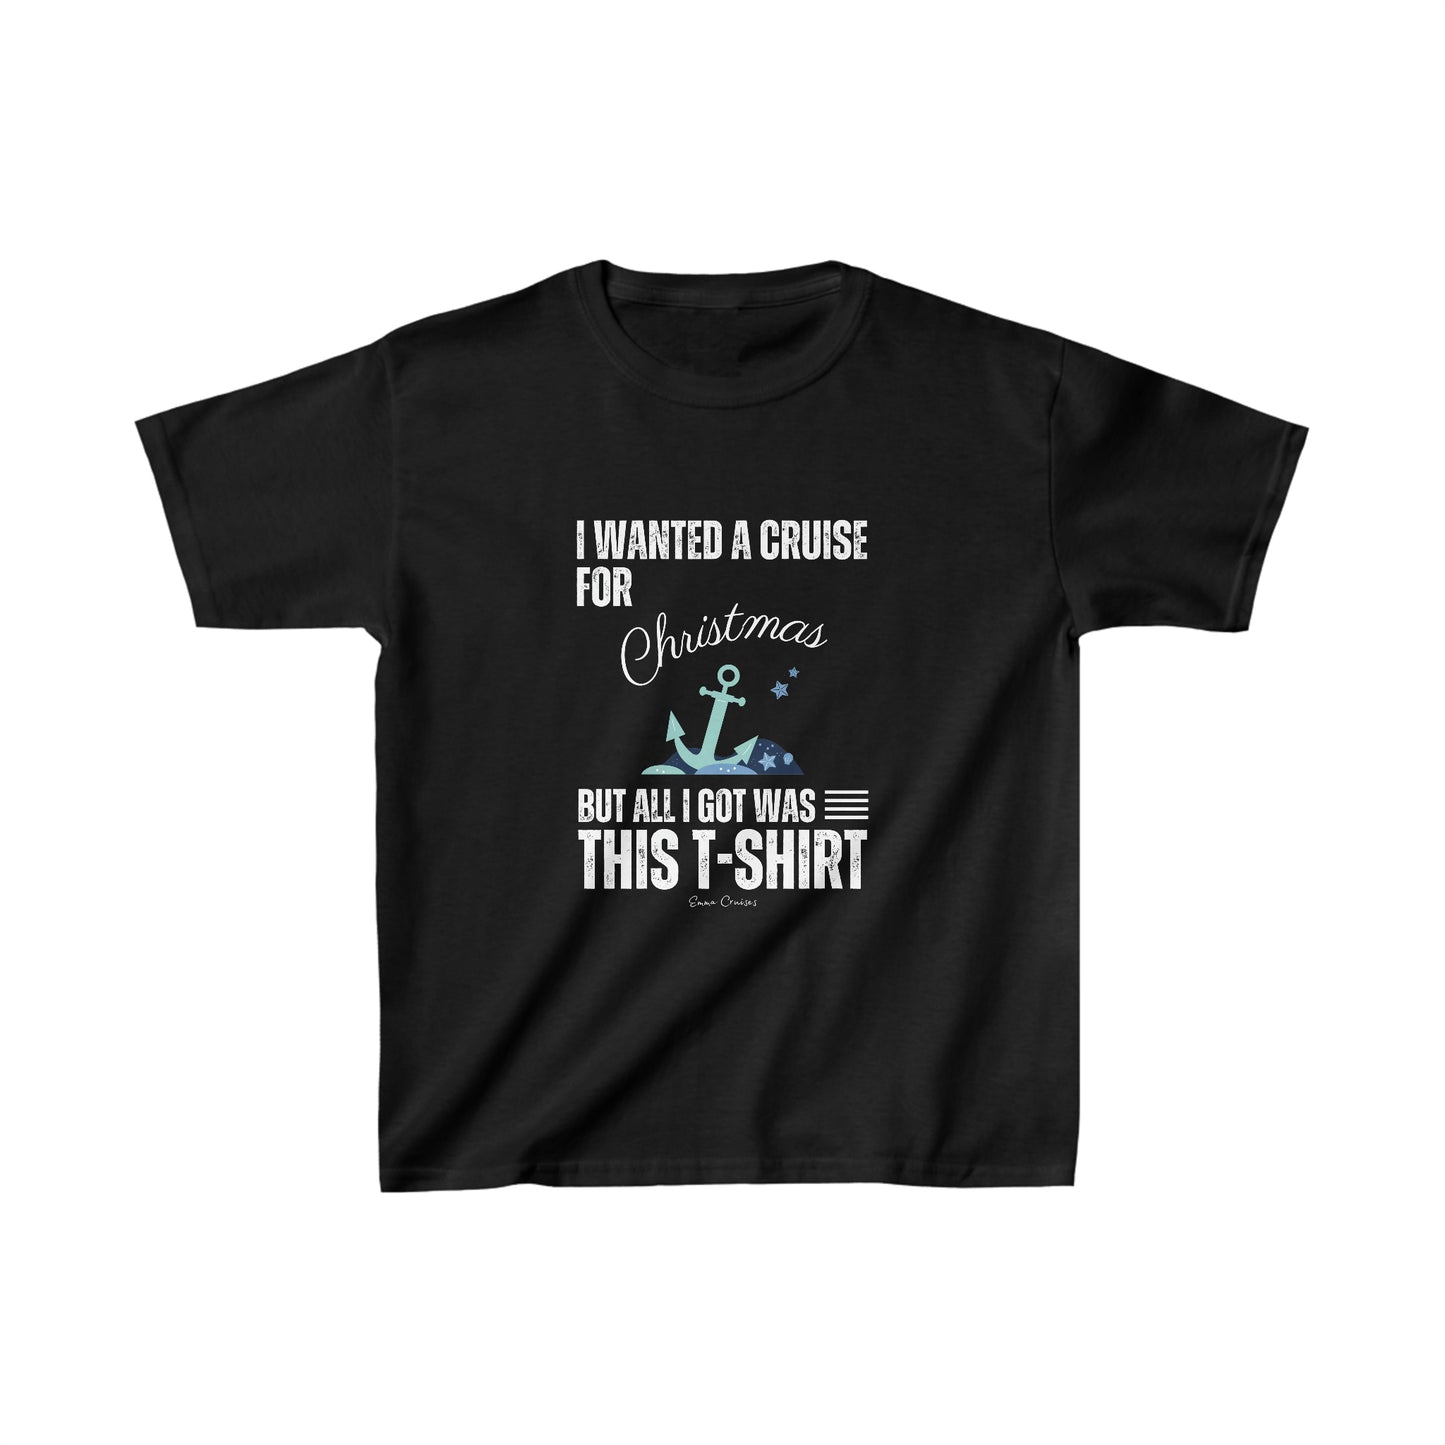 I Wanted a Cruise for Christmas - Kids UNISEX T-Shirt